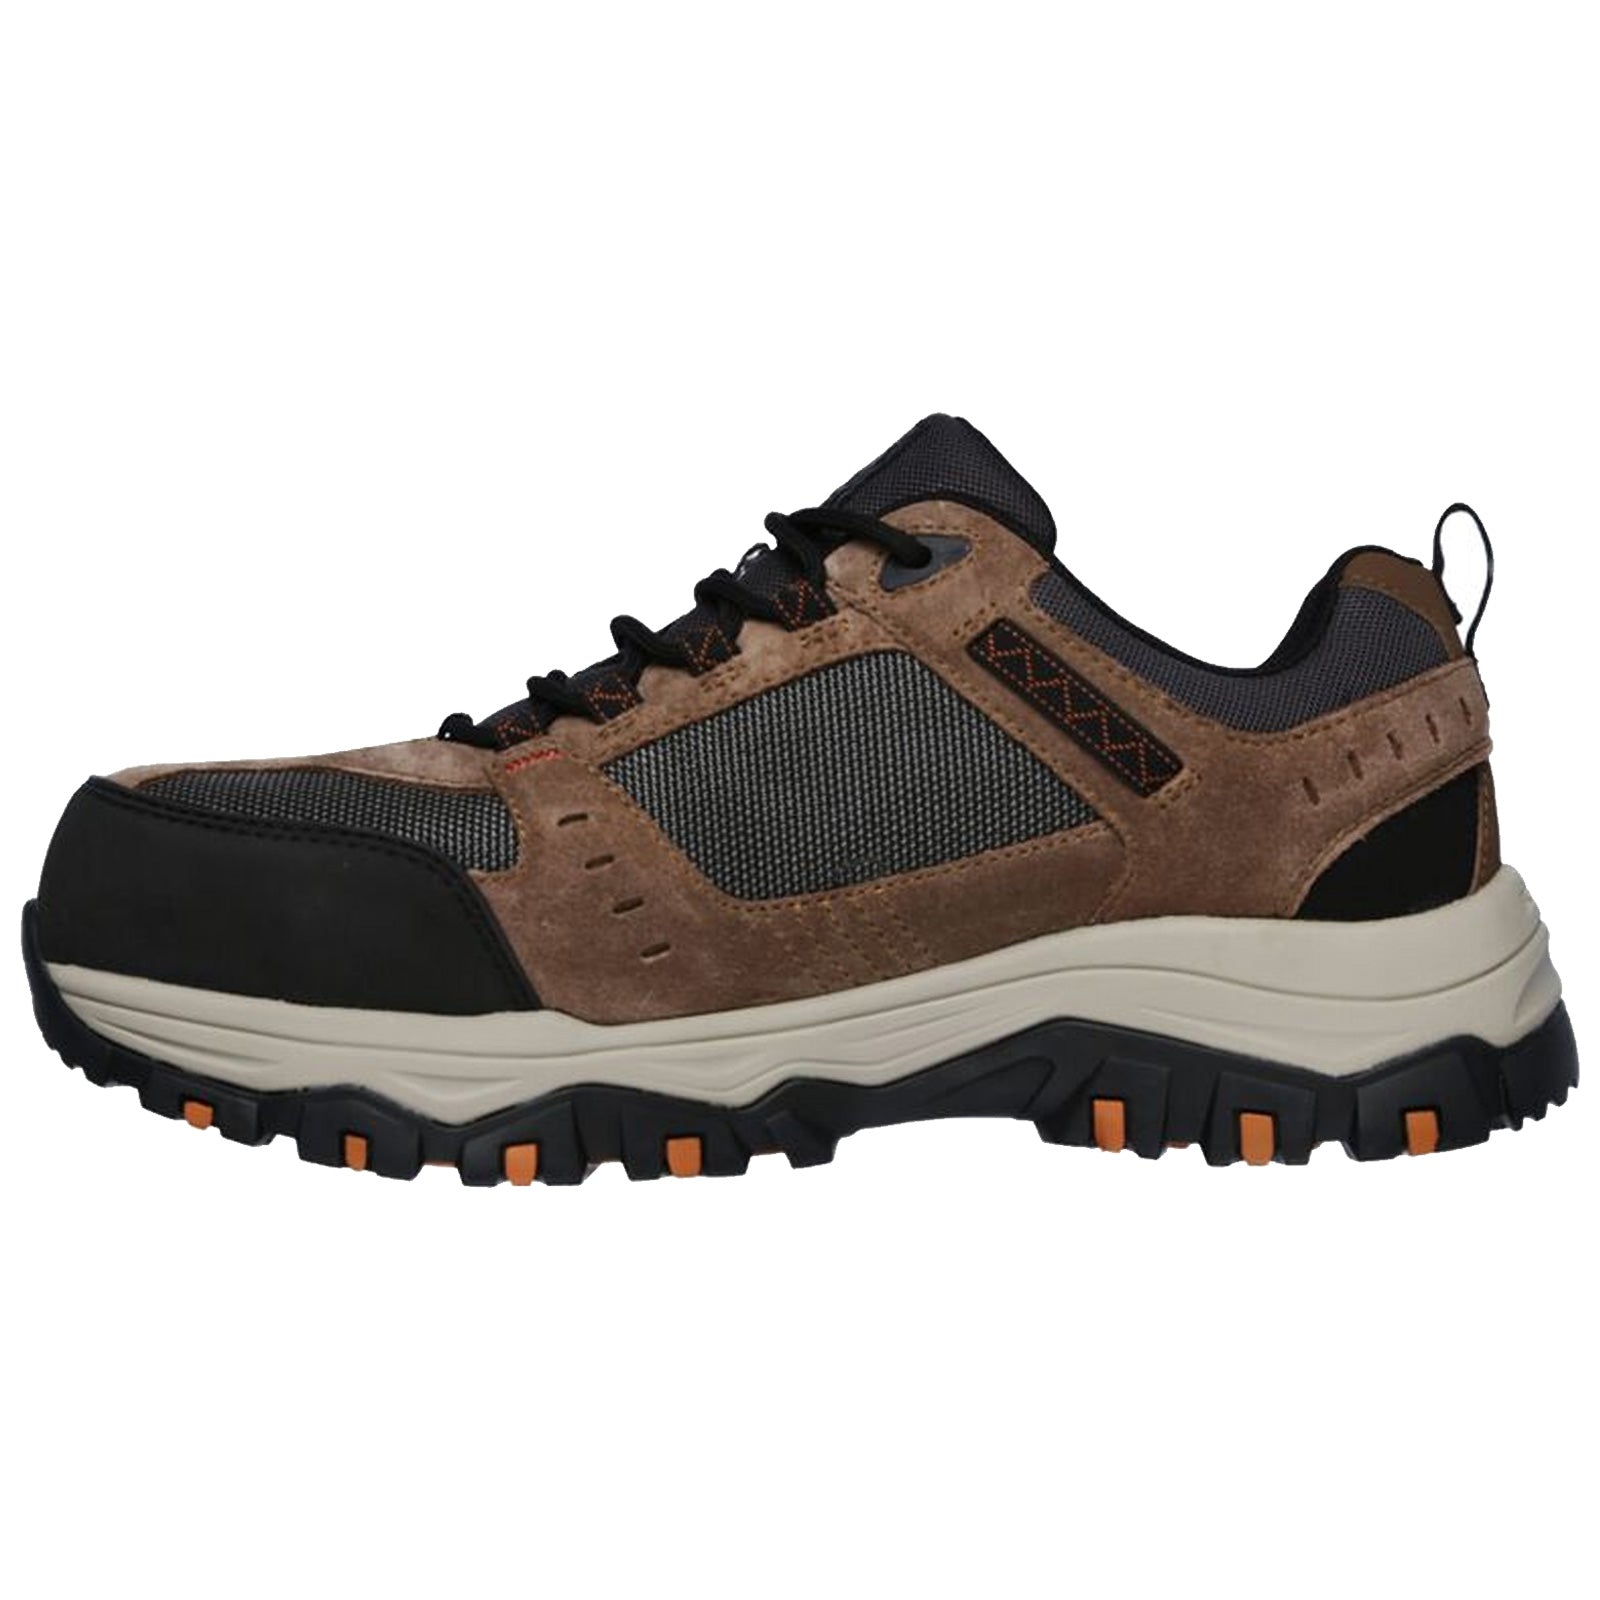 Skechers Mens Work Greetah Composite Toe Safety Shoes